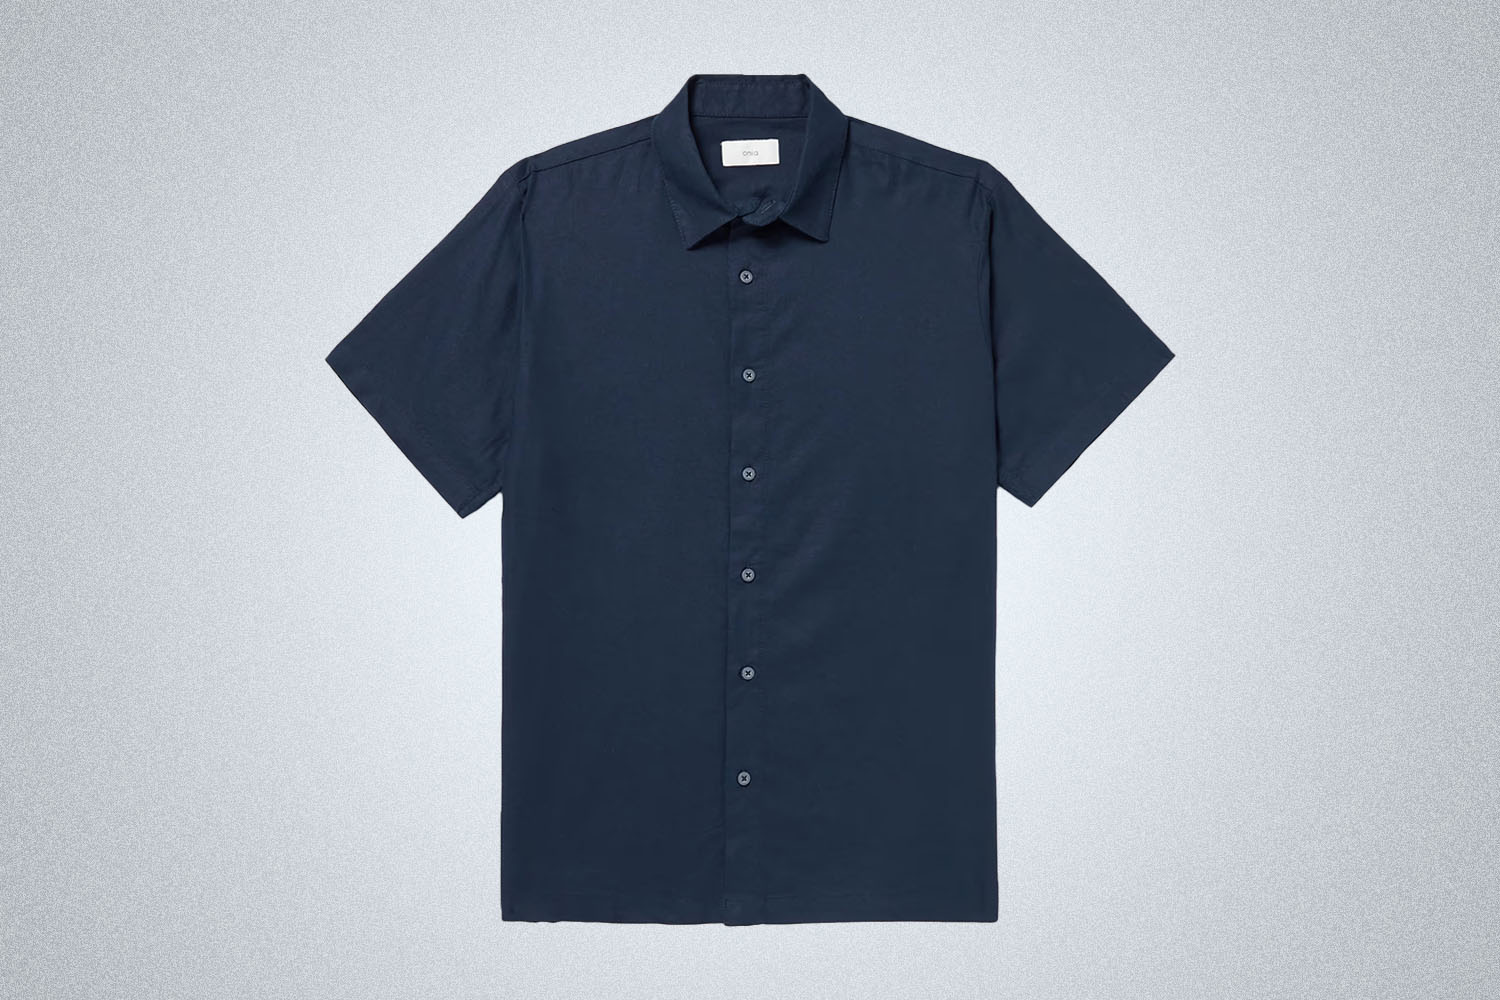 a navy blue linen button down from Onia on a grey background